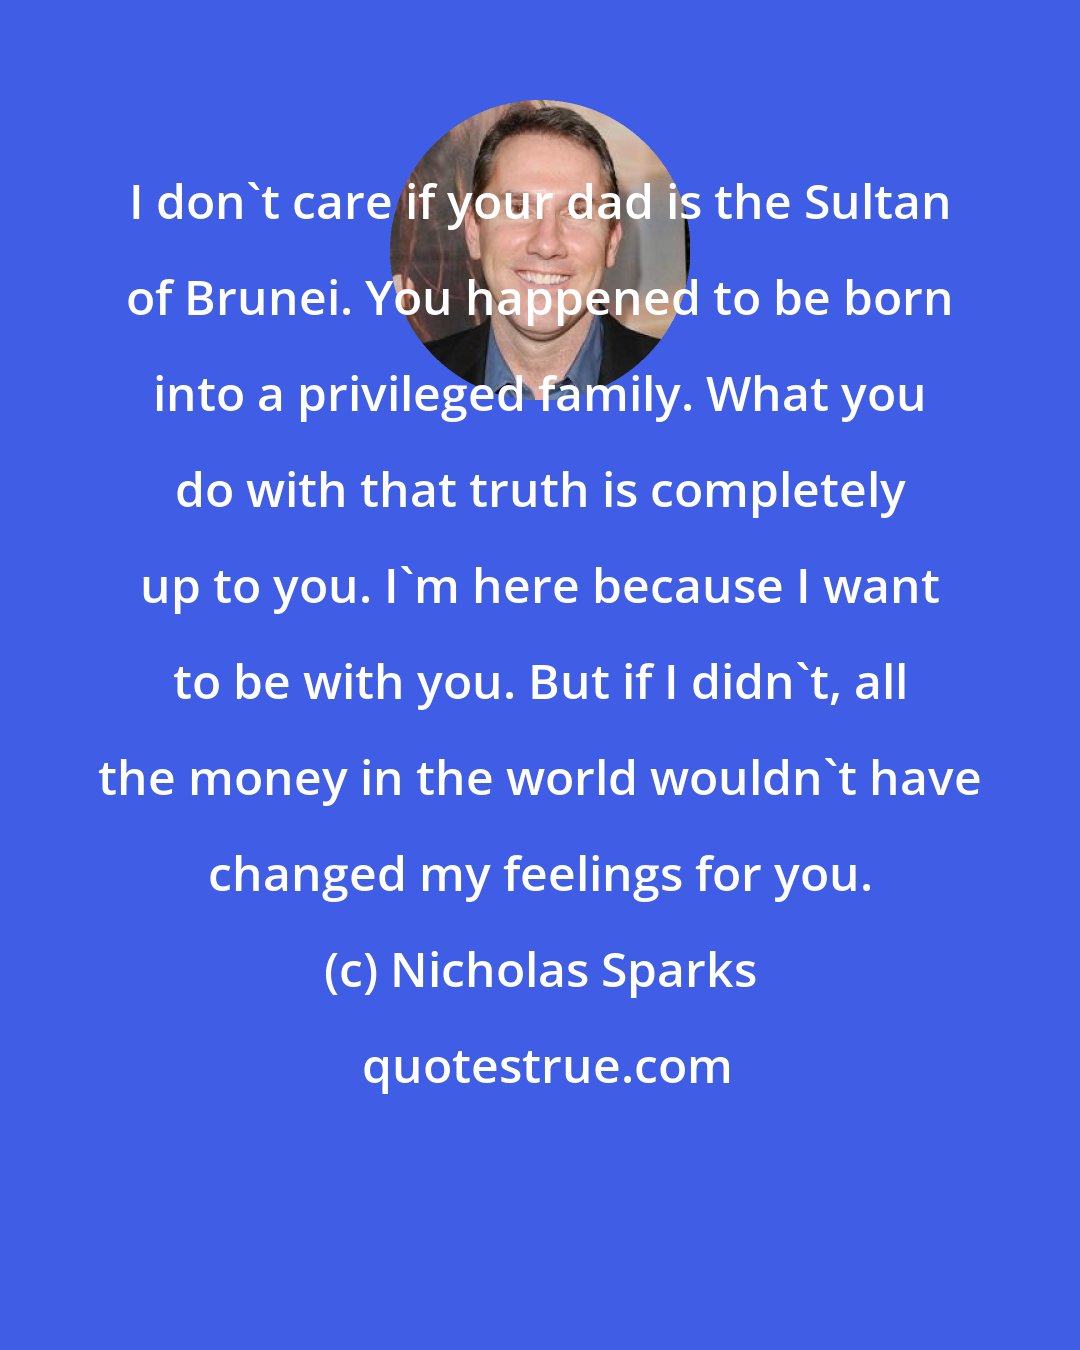 Nicholas Sparks: I don't care if your dad is the Sultan of Brunei. You happened to be born into a privileged family. What you do with that truth is completely up to you. I'm here because I want to be with you. But if I didn't, all the money in the world wouldn't have changed my feelings for you.